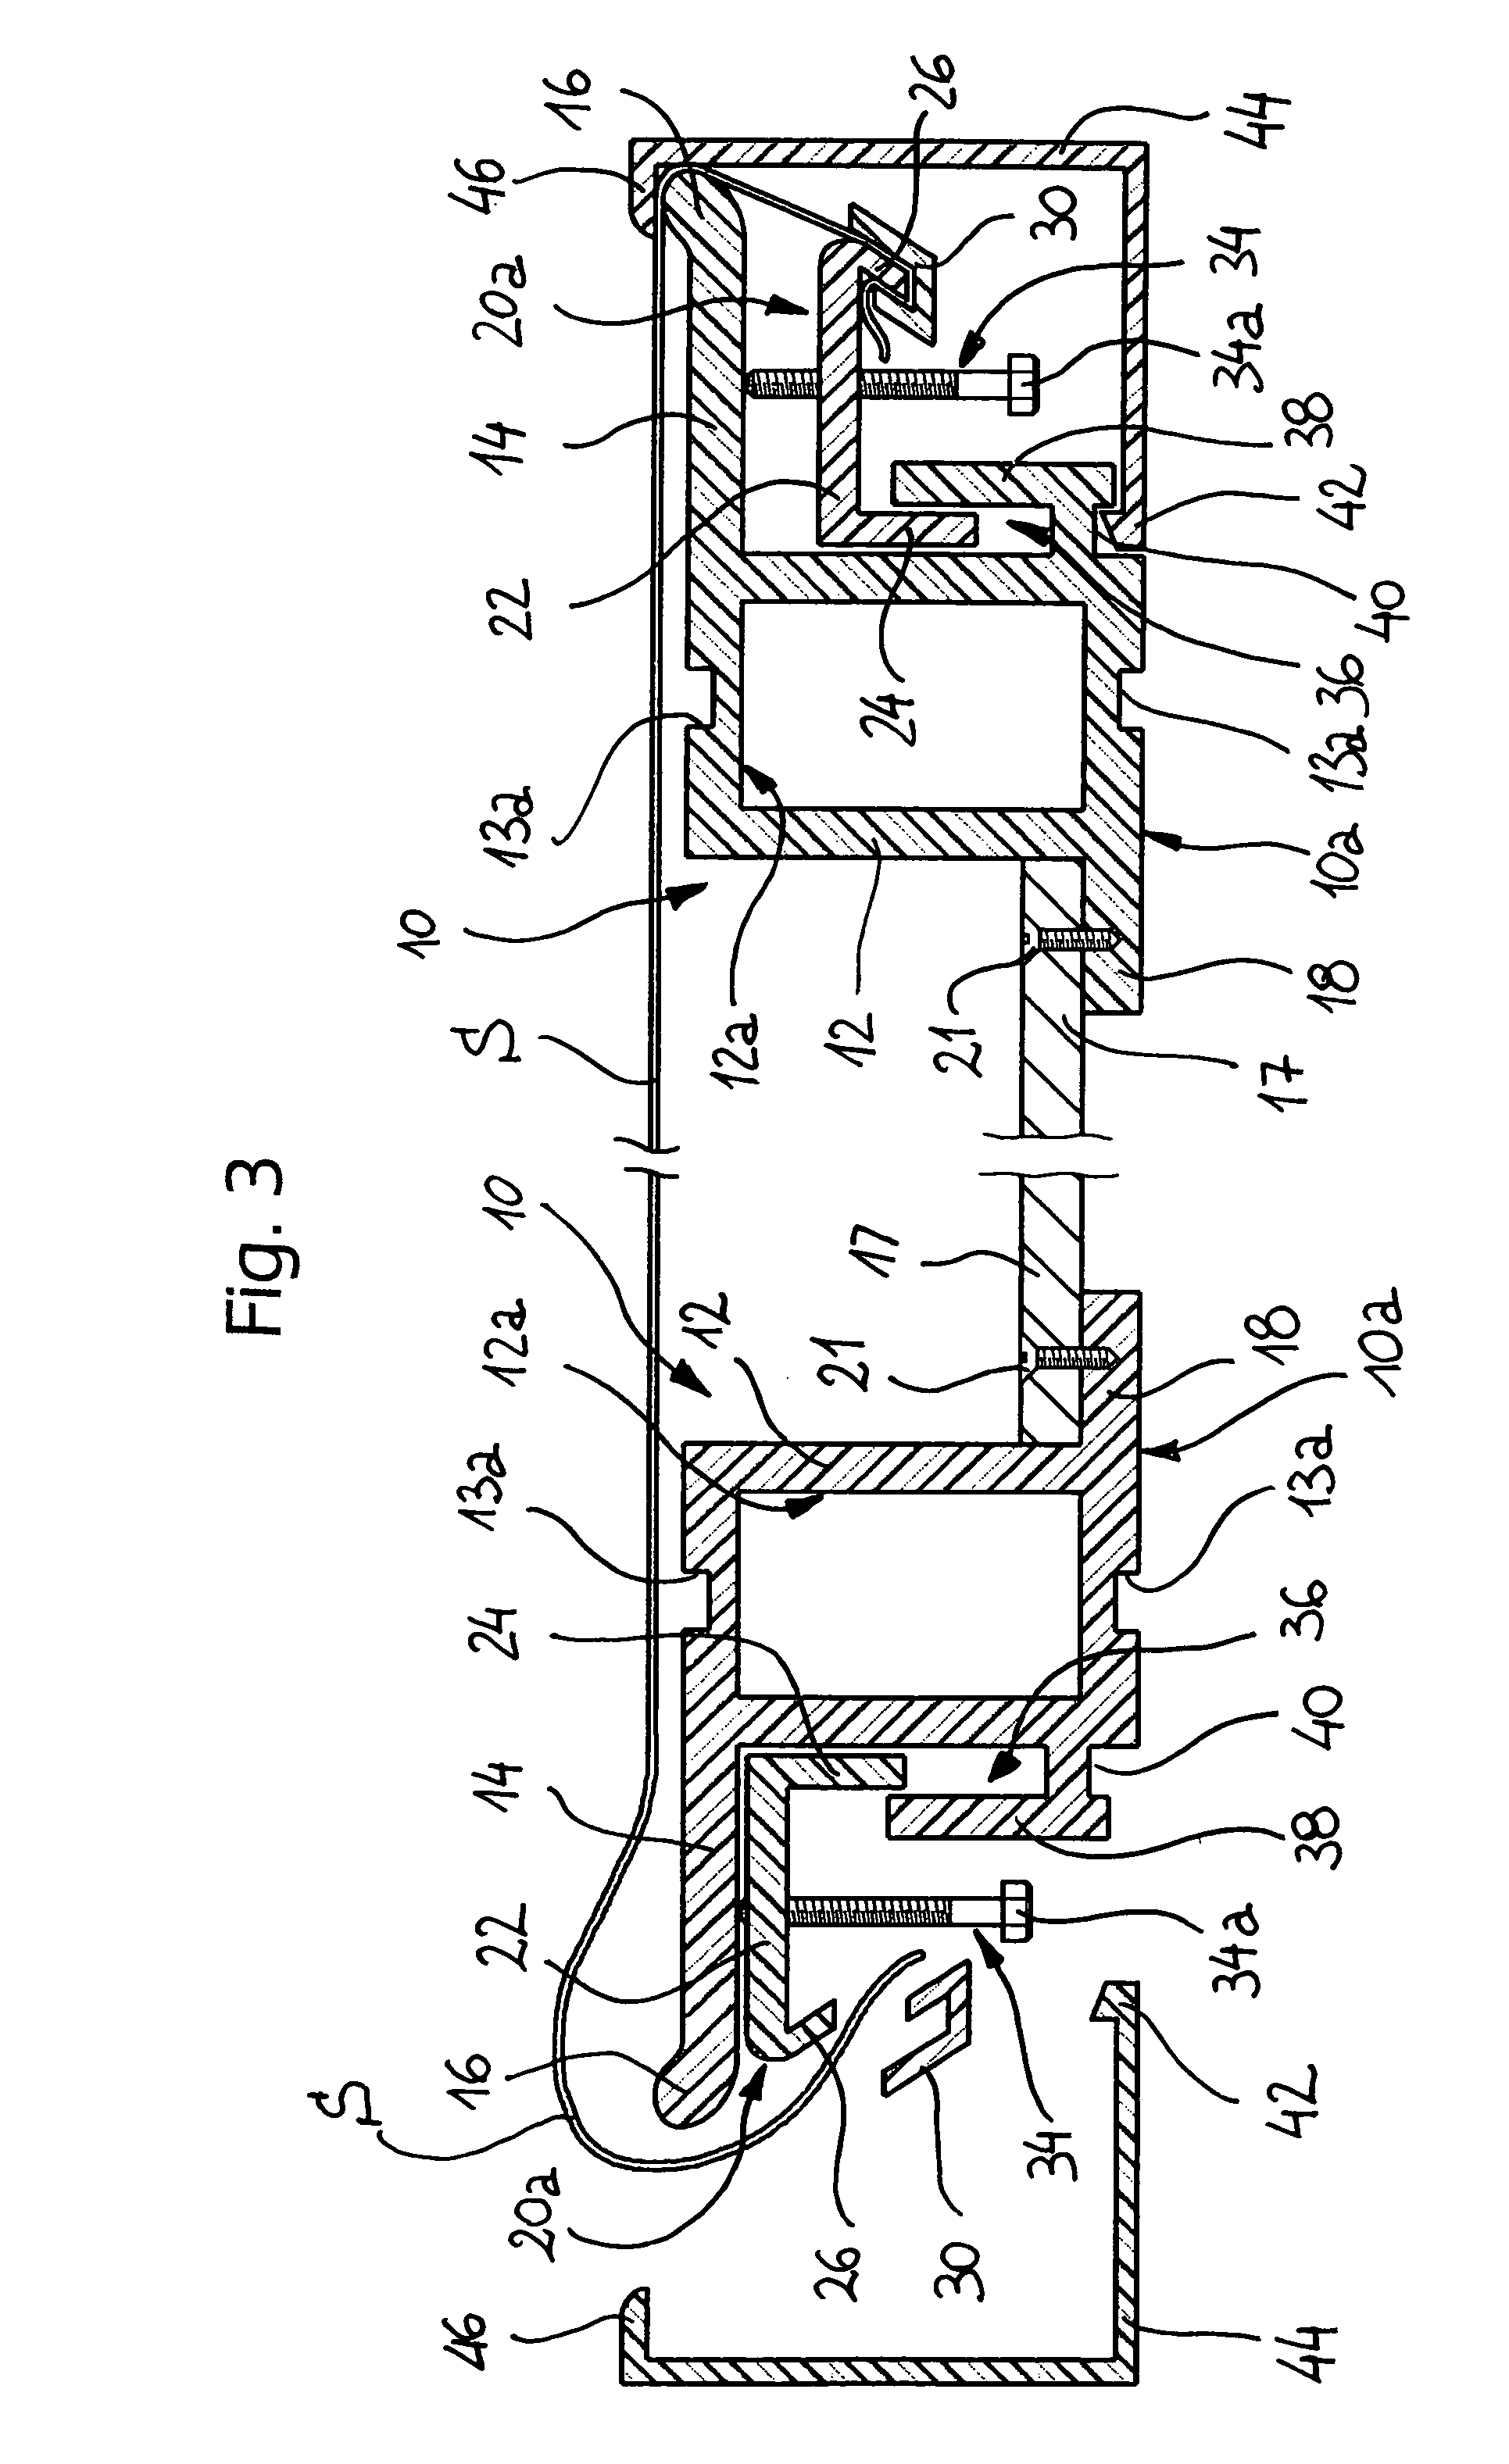 Elongated element for the frame of a panel system comprising a flexible sheet material